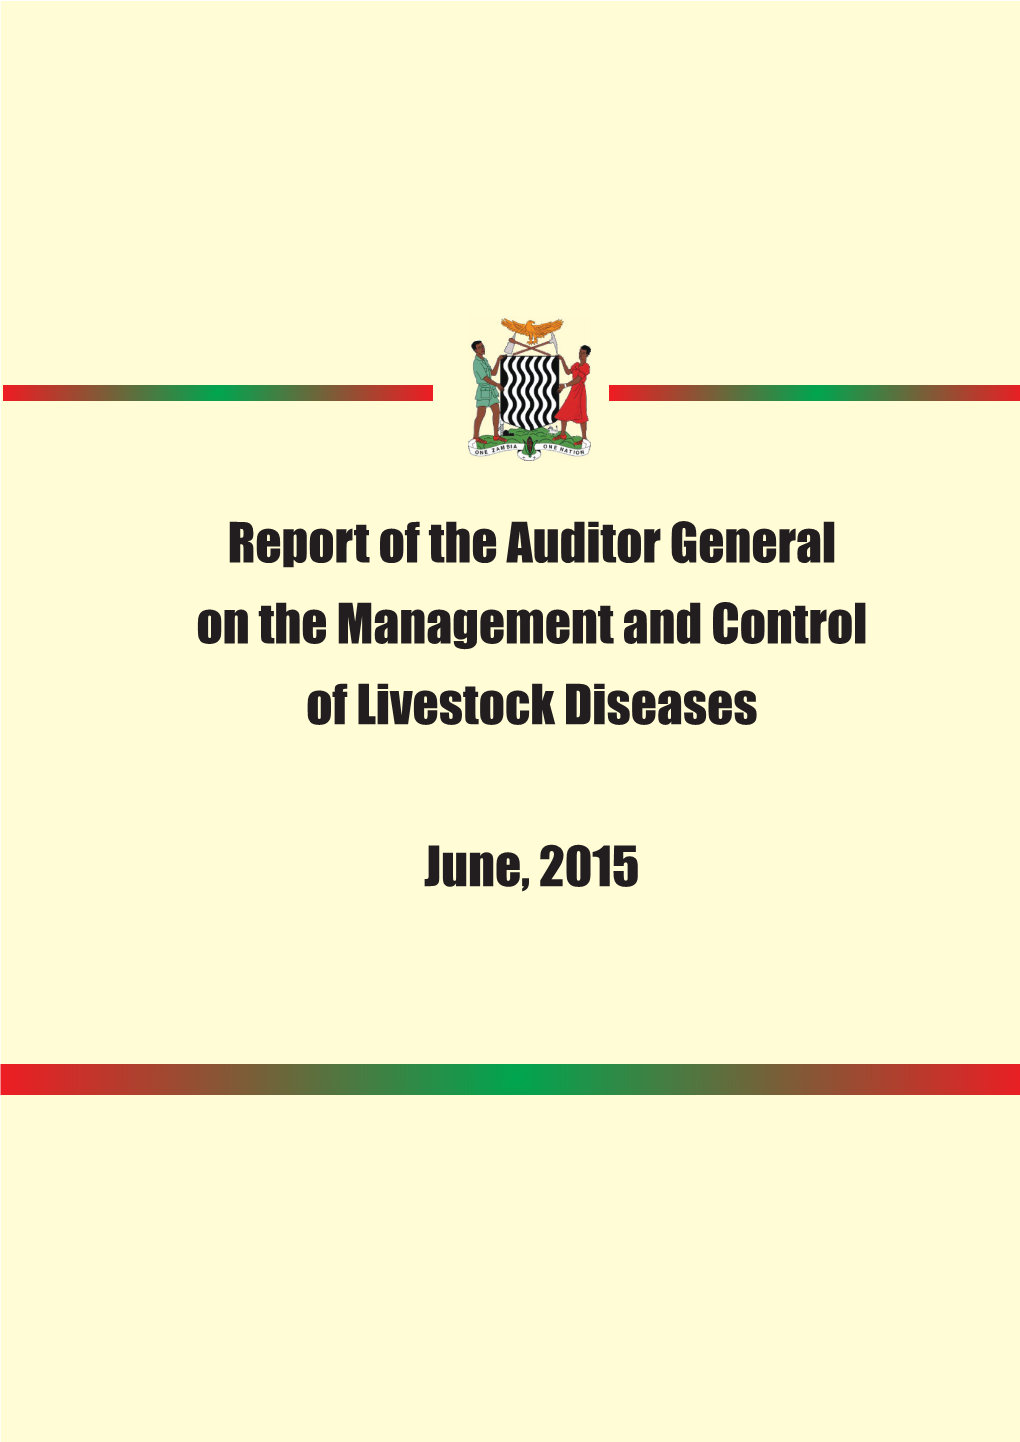 Report of the Auditor General on the Management and Control of Livestock Diseases